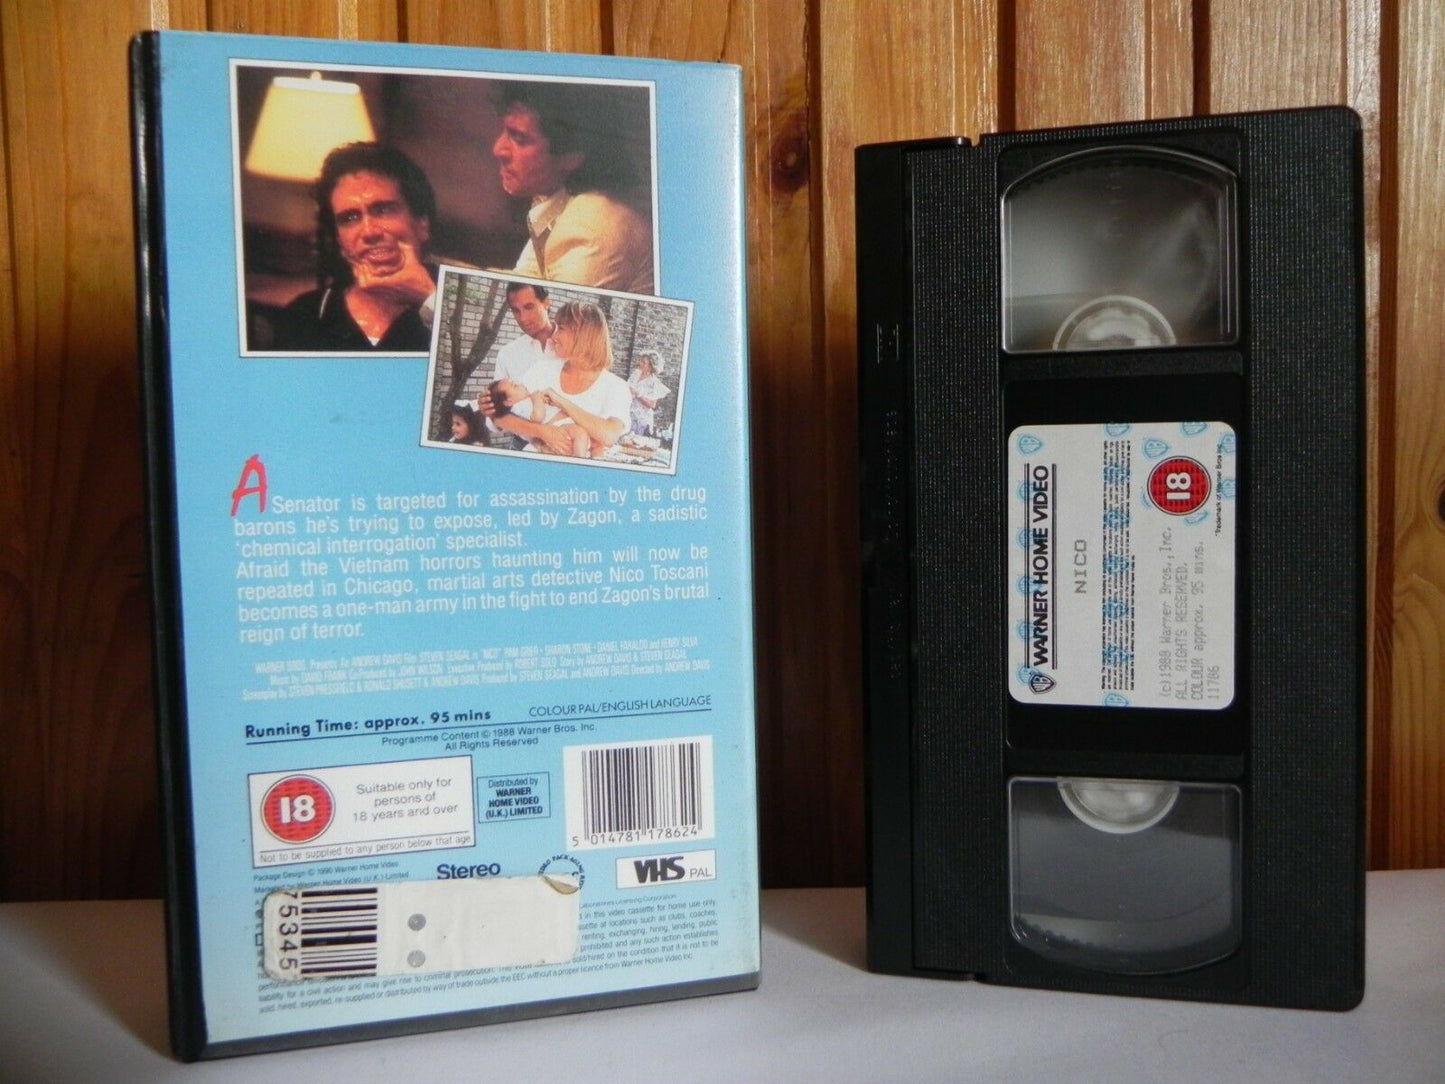 Nico: Above The Law - Original (1990) Release - 80's Action/Seagal Aikido - VHS-